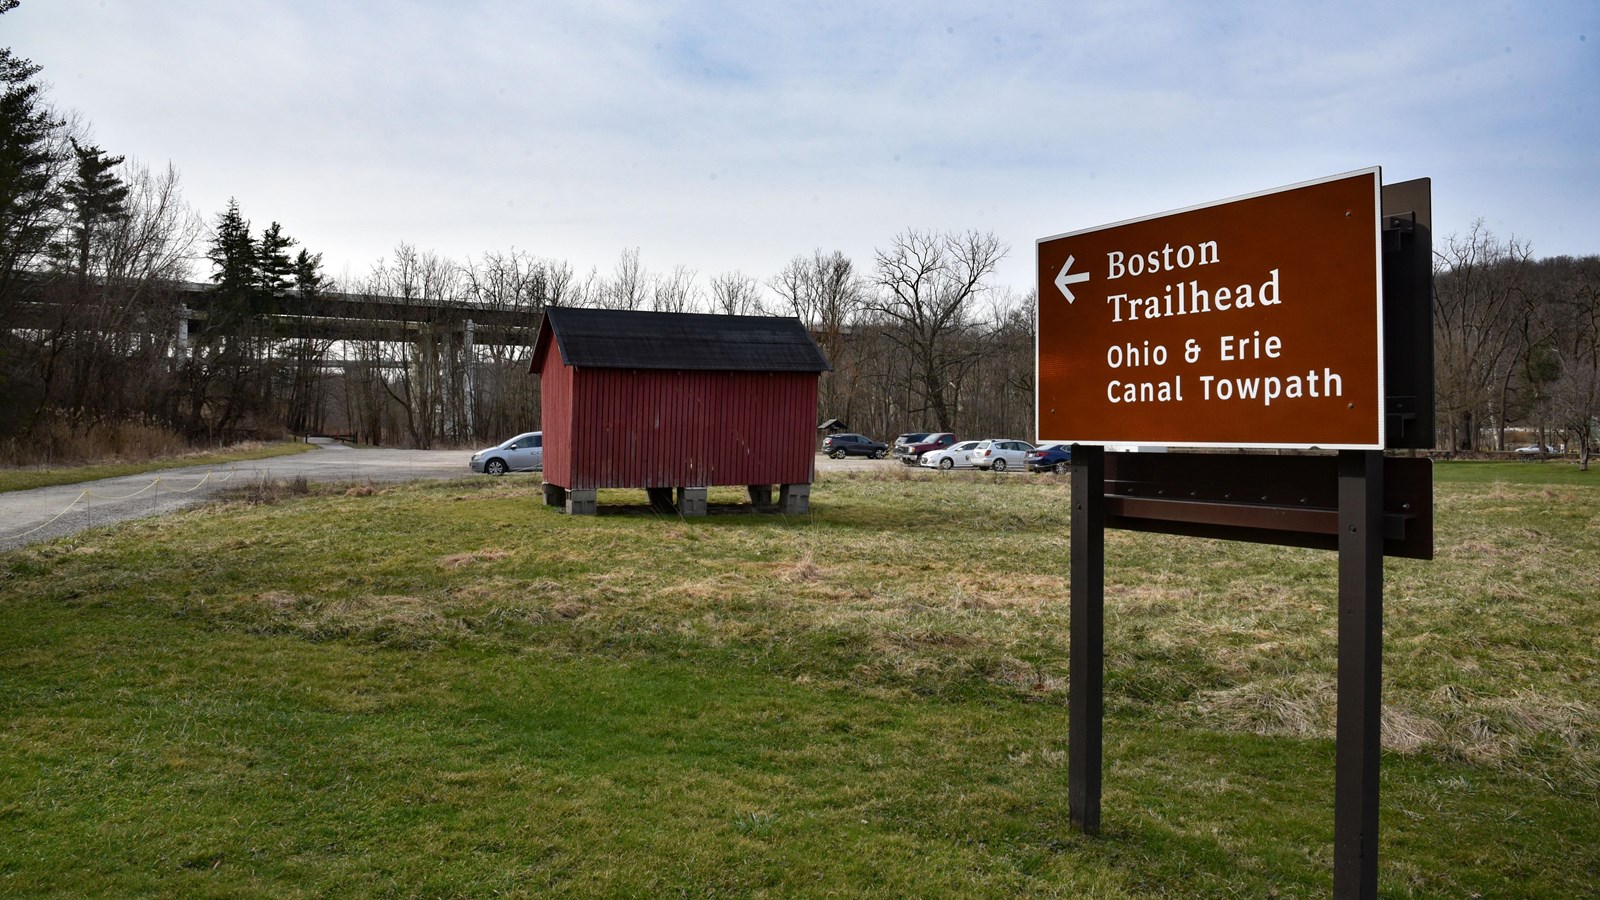 Road sign points to unpaved parking lot with a red corn crib, center, and distant highway bridges.